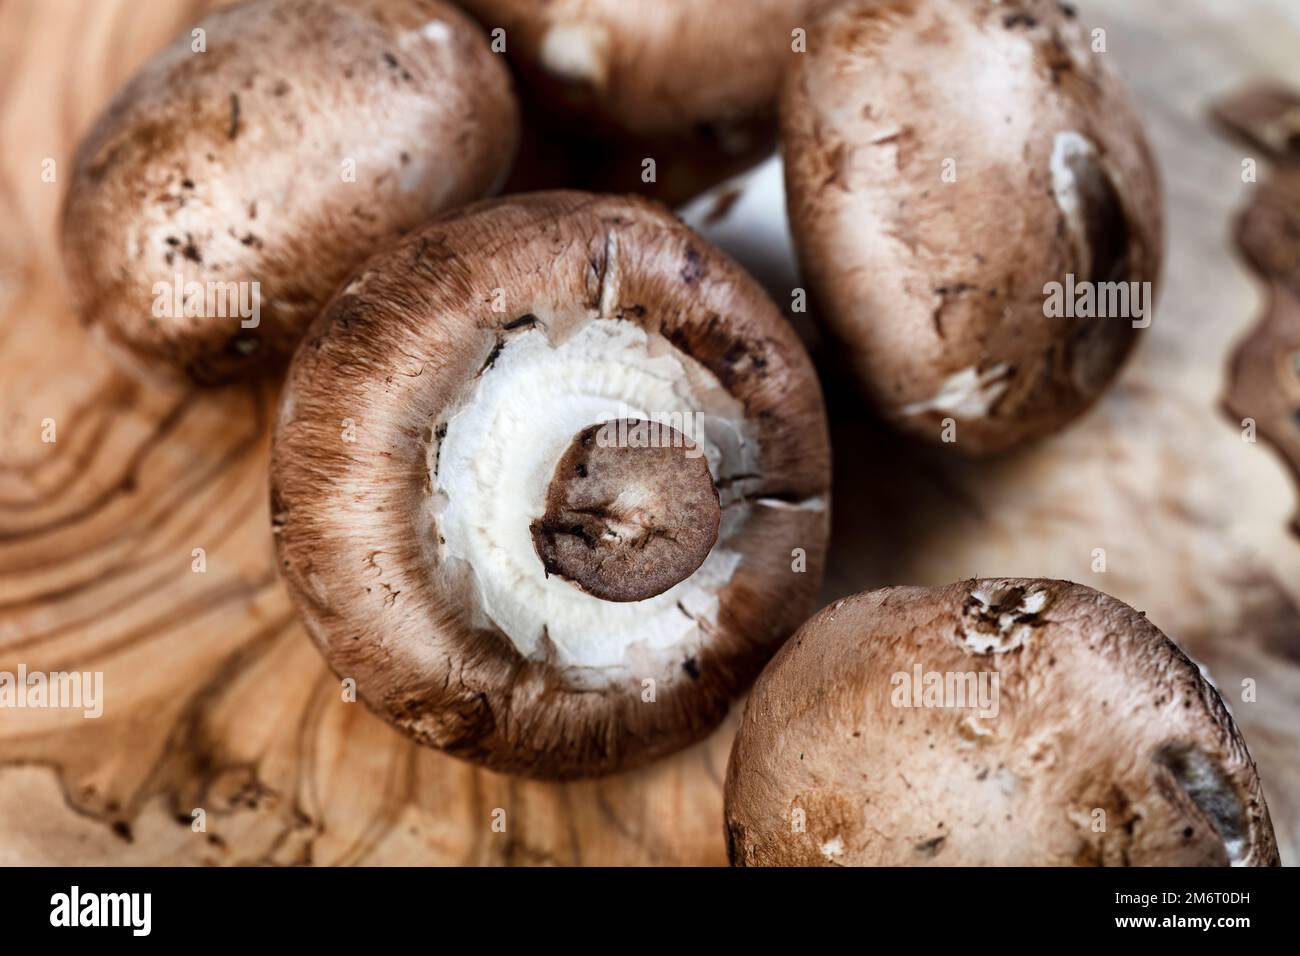 Champignon mushrooms in close up view on wood background Stock Photo